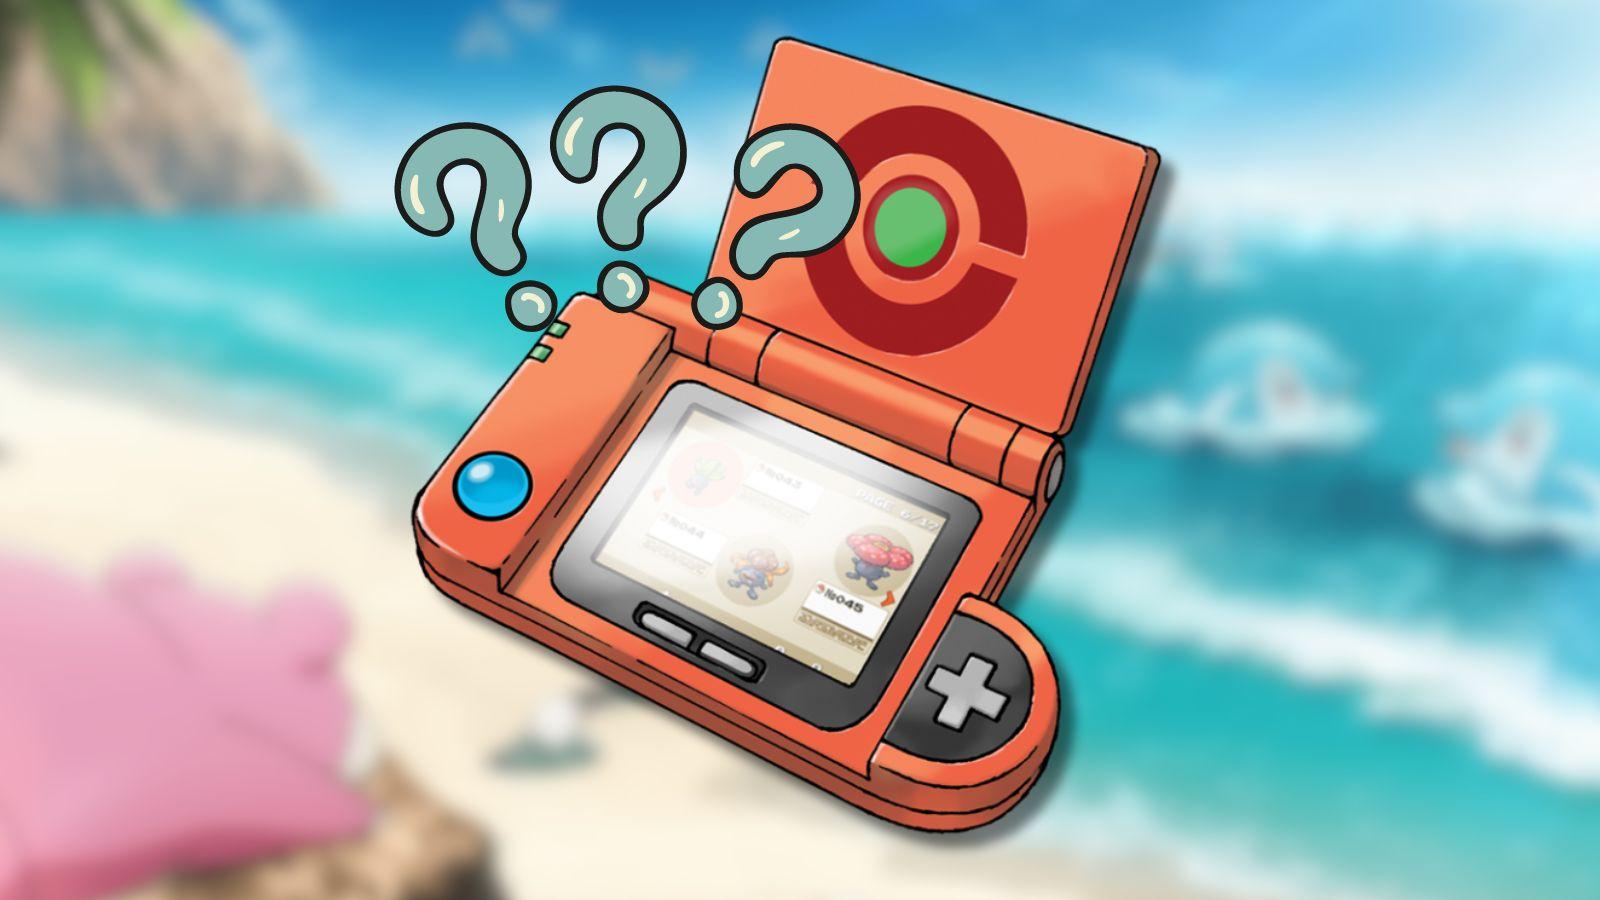 Pokedex with question marks and beach background.